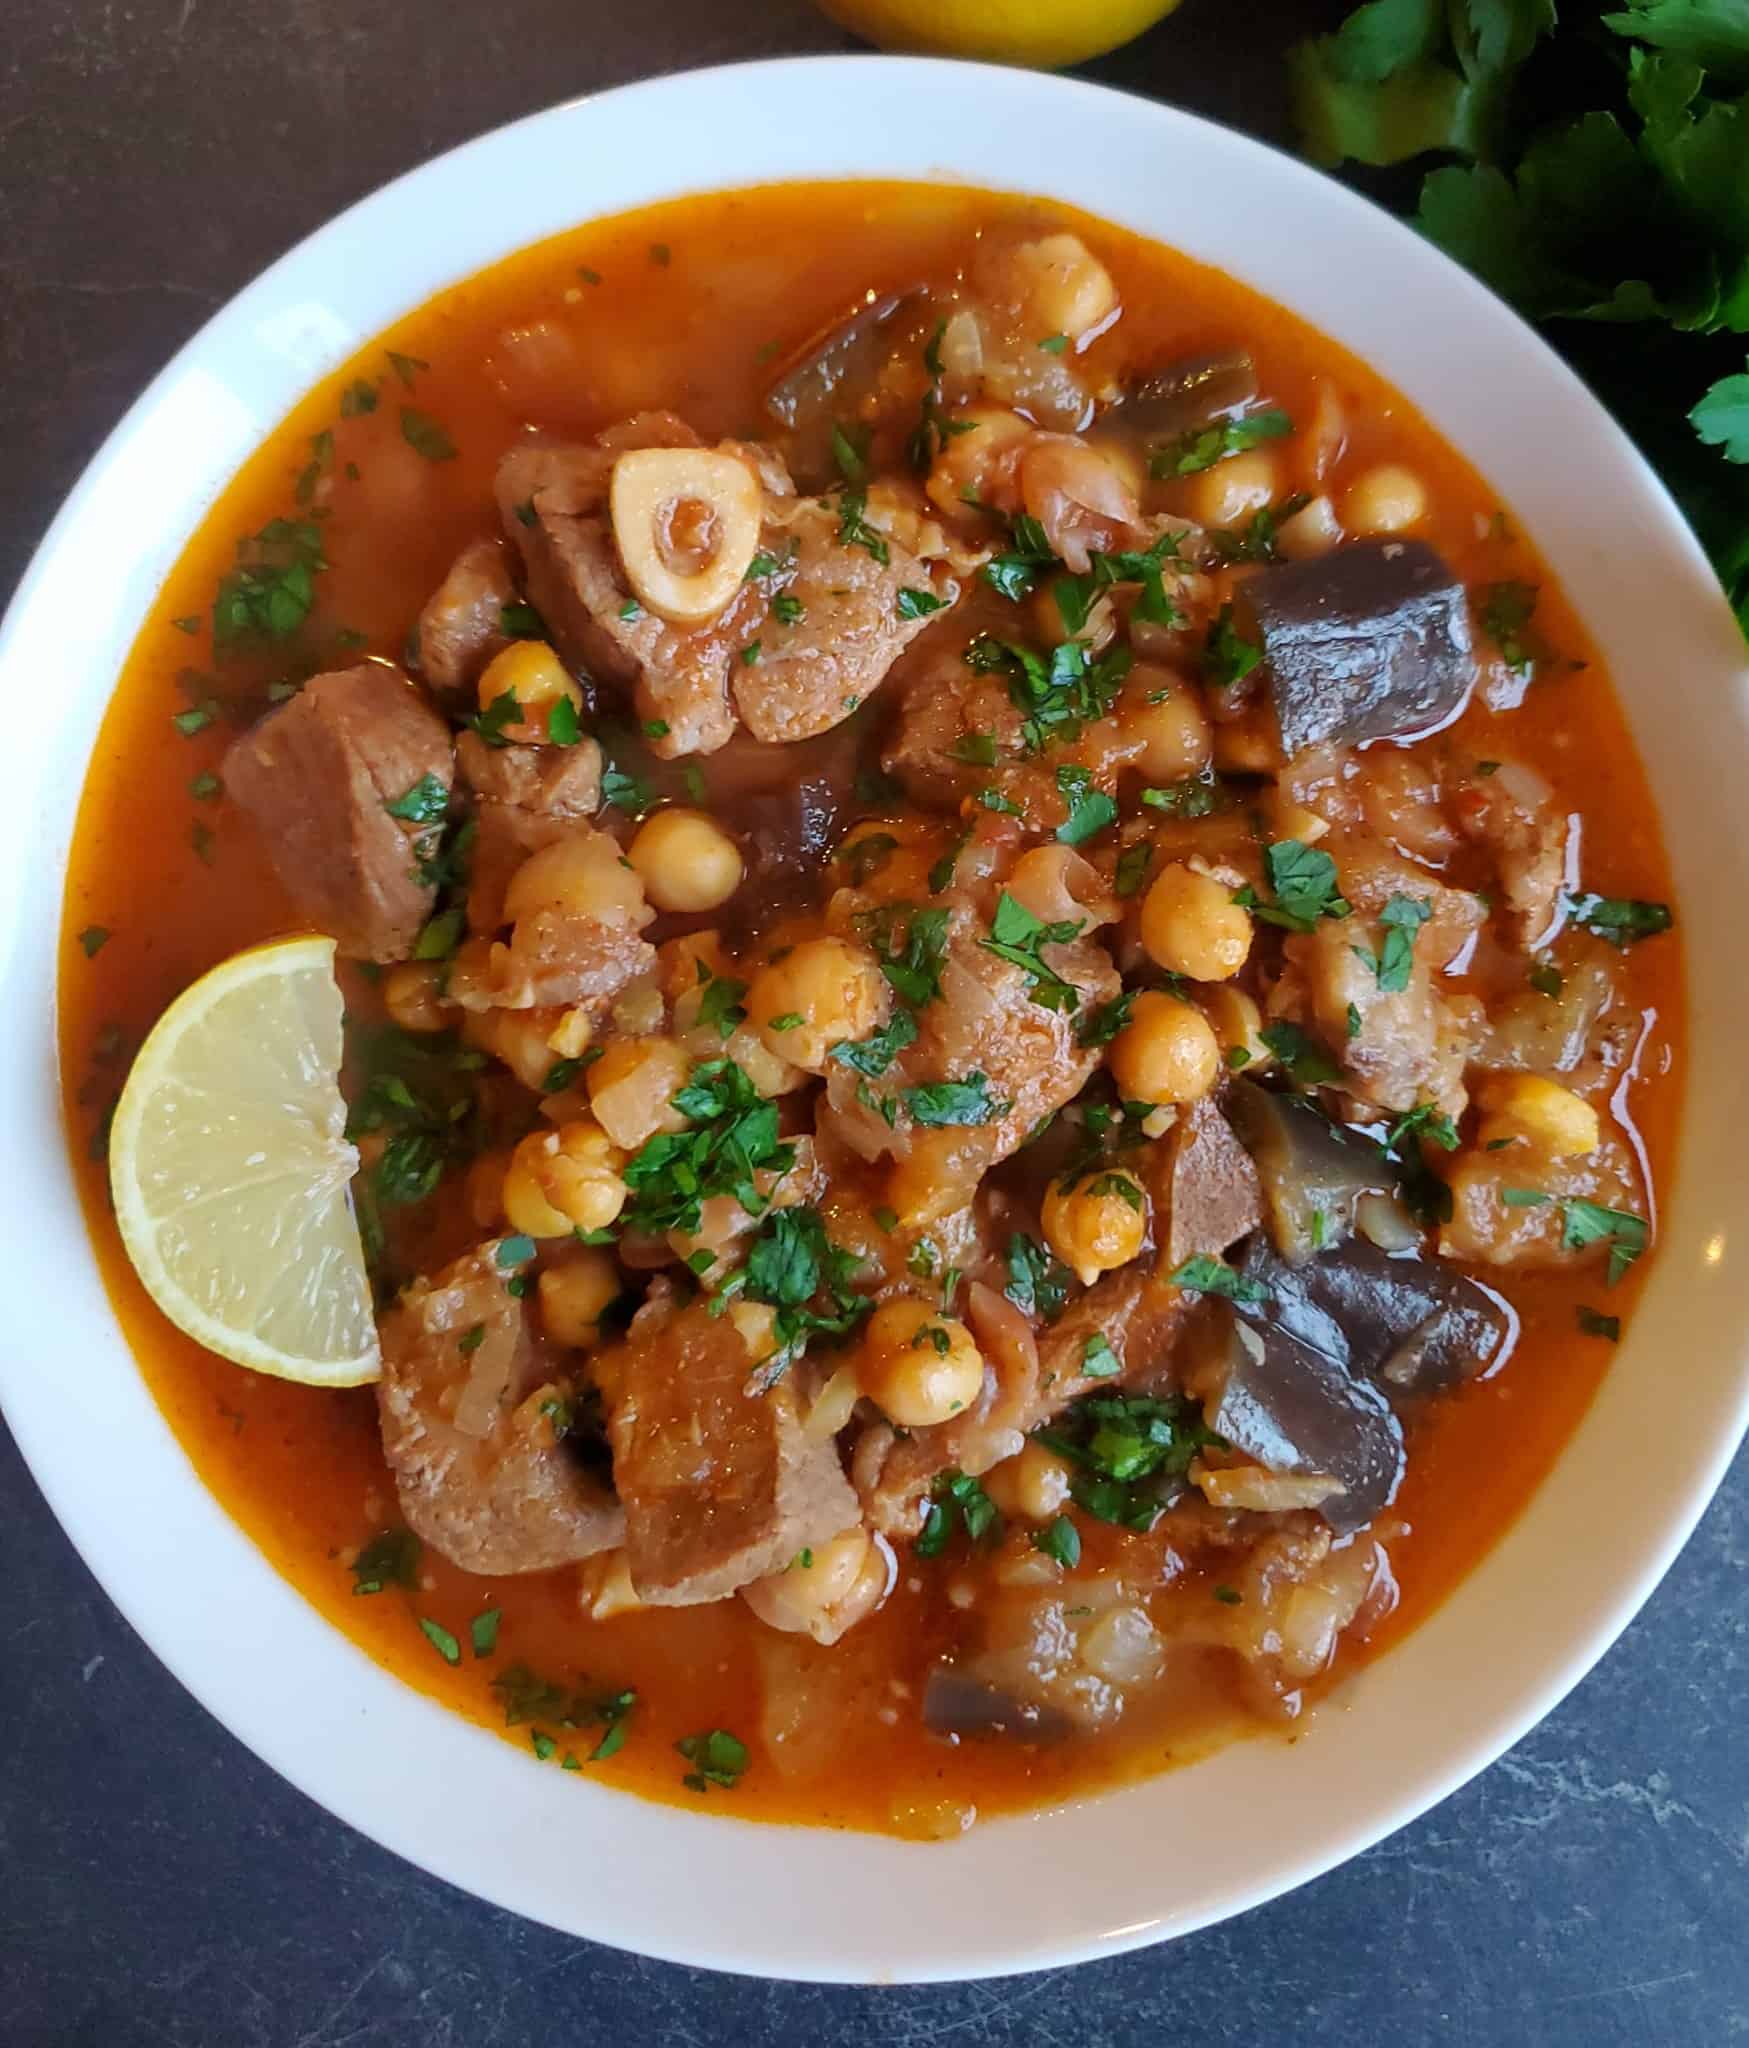 How To Make Moroccan Lamb Stew